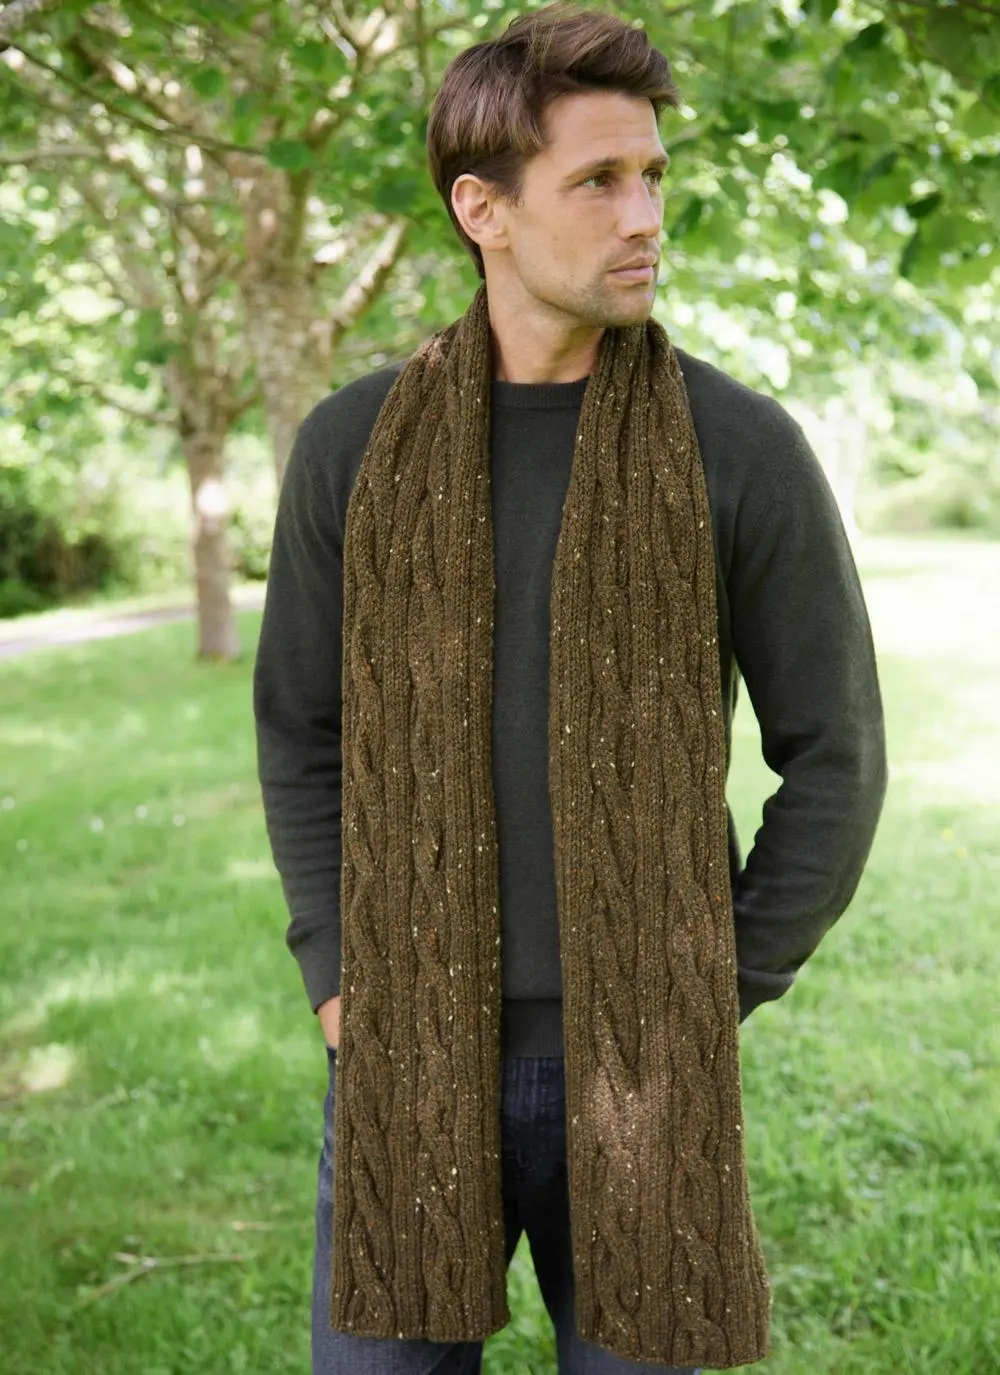 Men's Winter Hat and Scarf Knitting Pattern